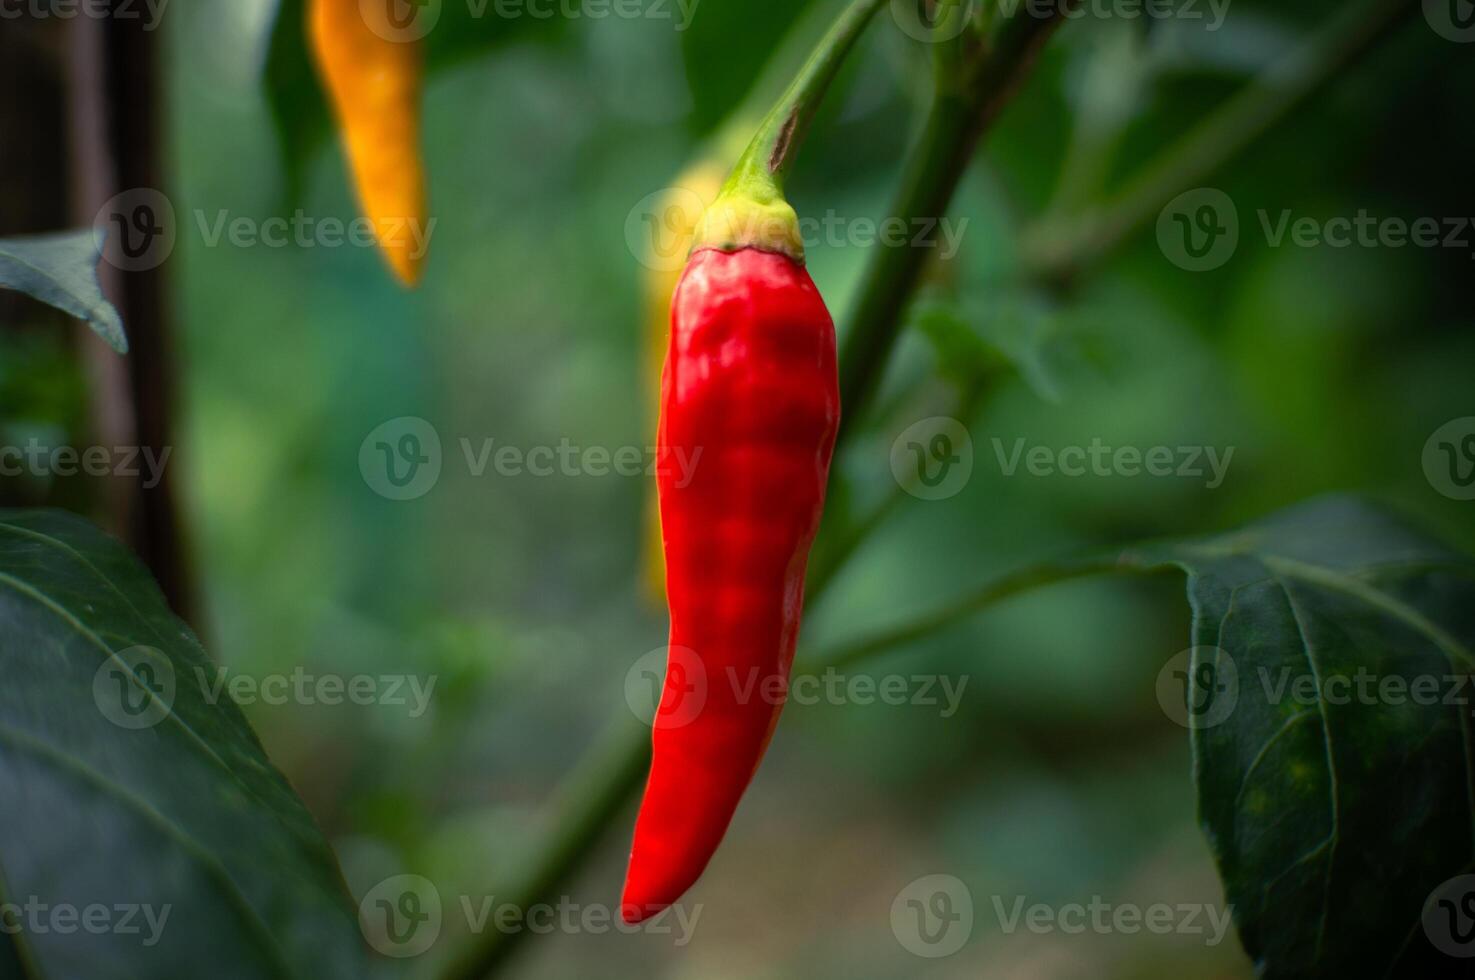 Ripe red chilies, ready to be harvested photo